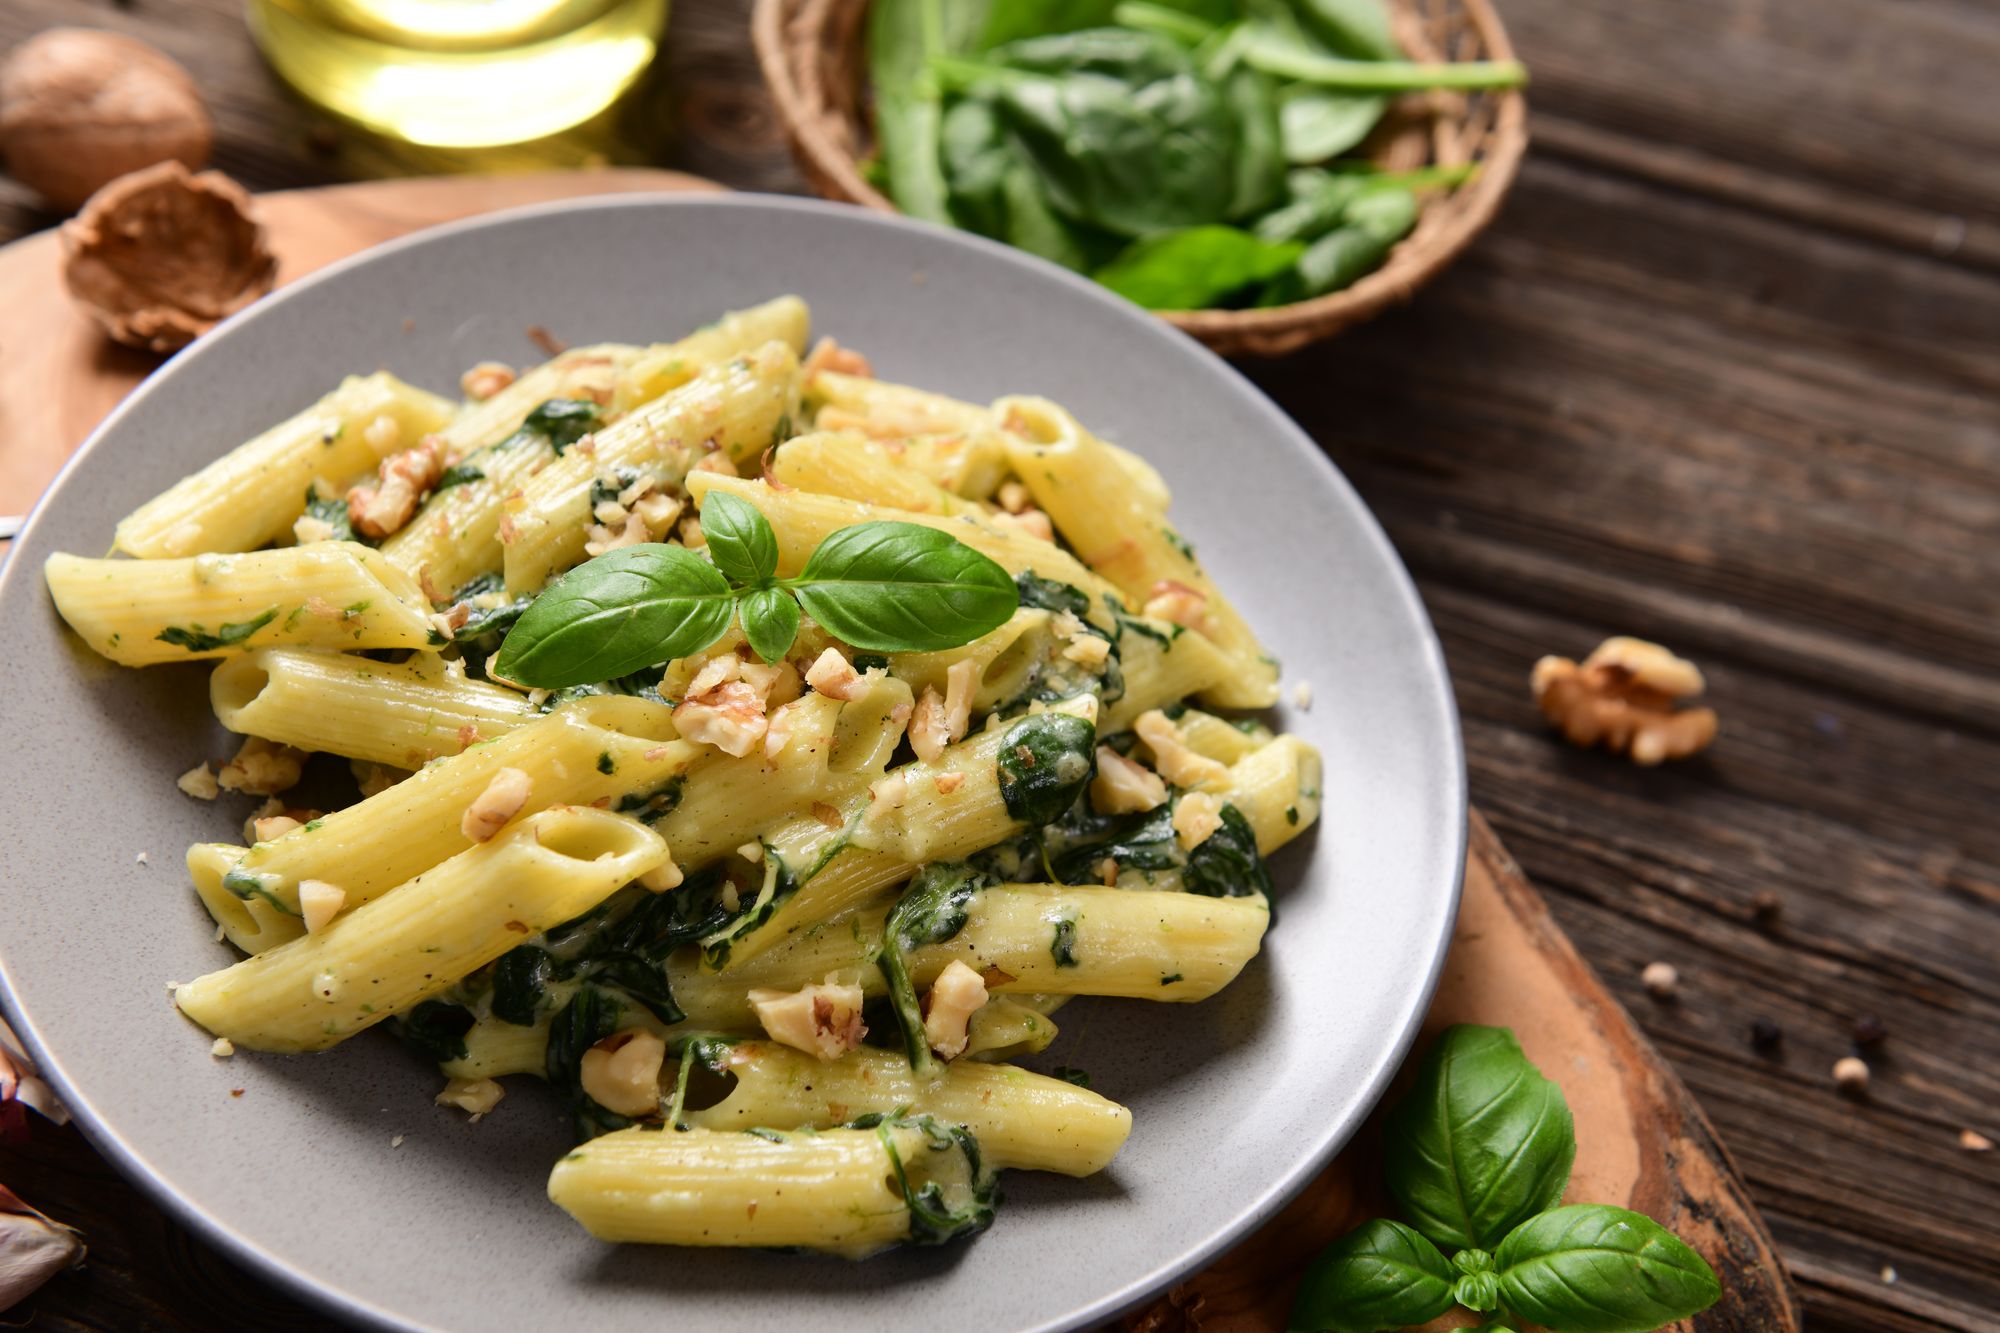 Penne with Leek, Spinach and Ricotta